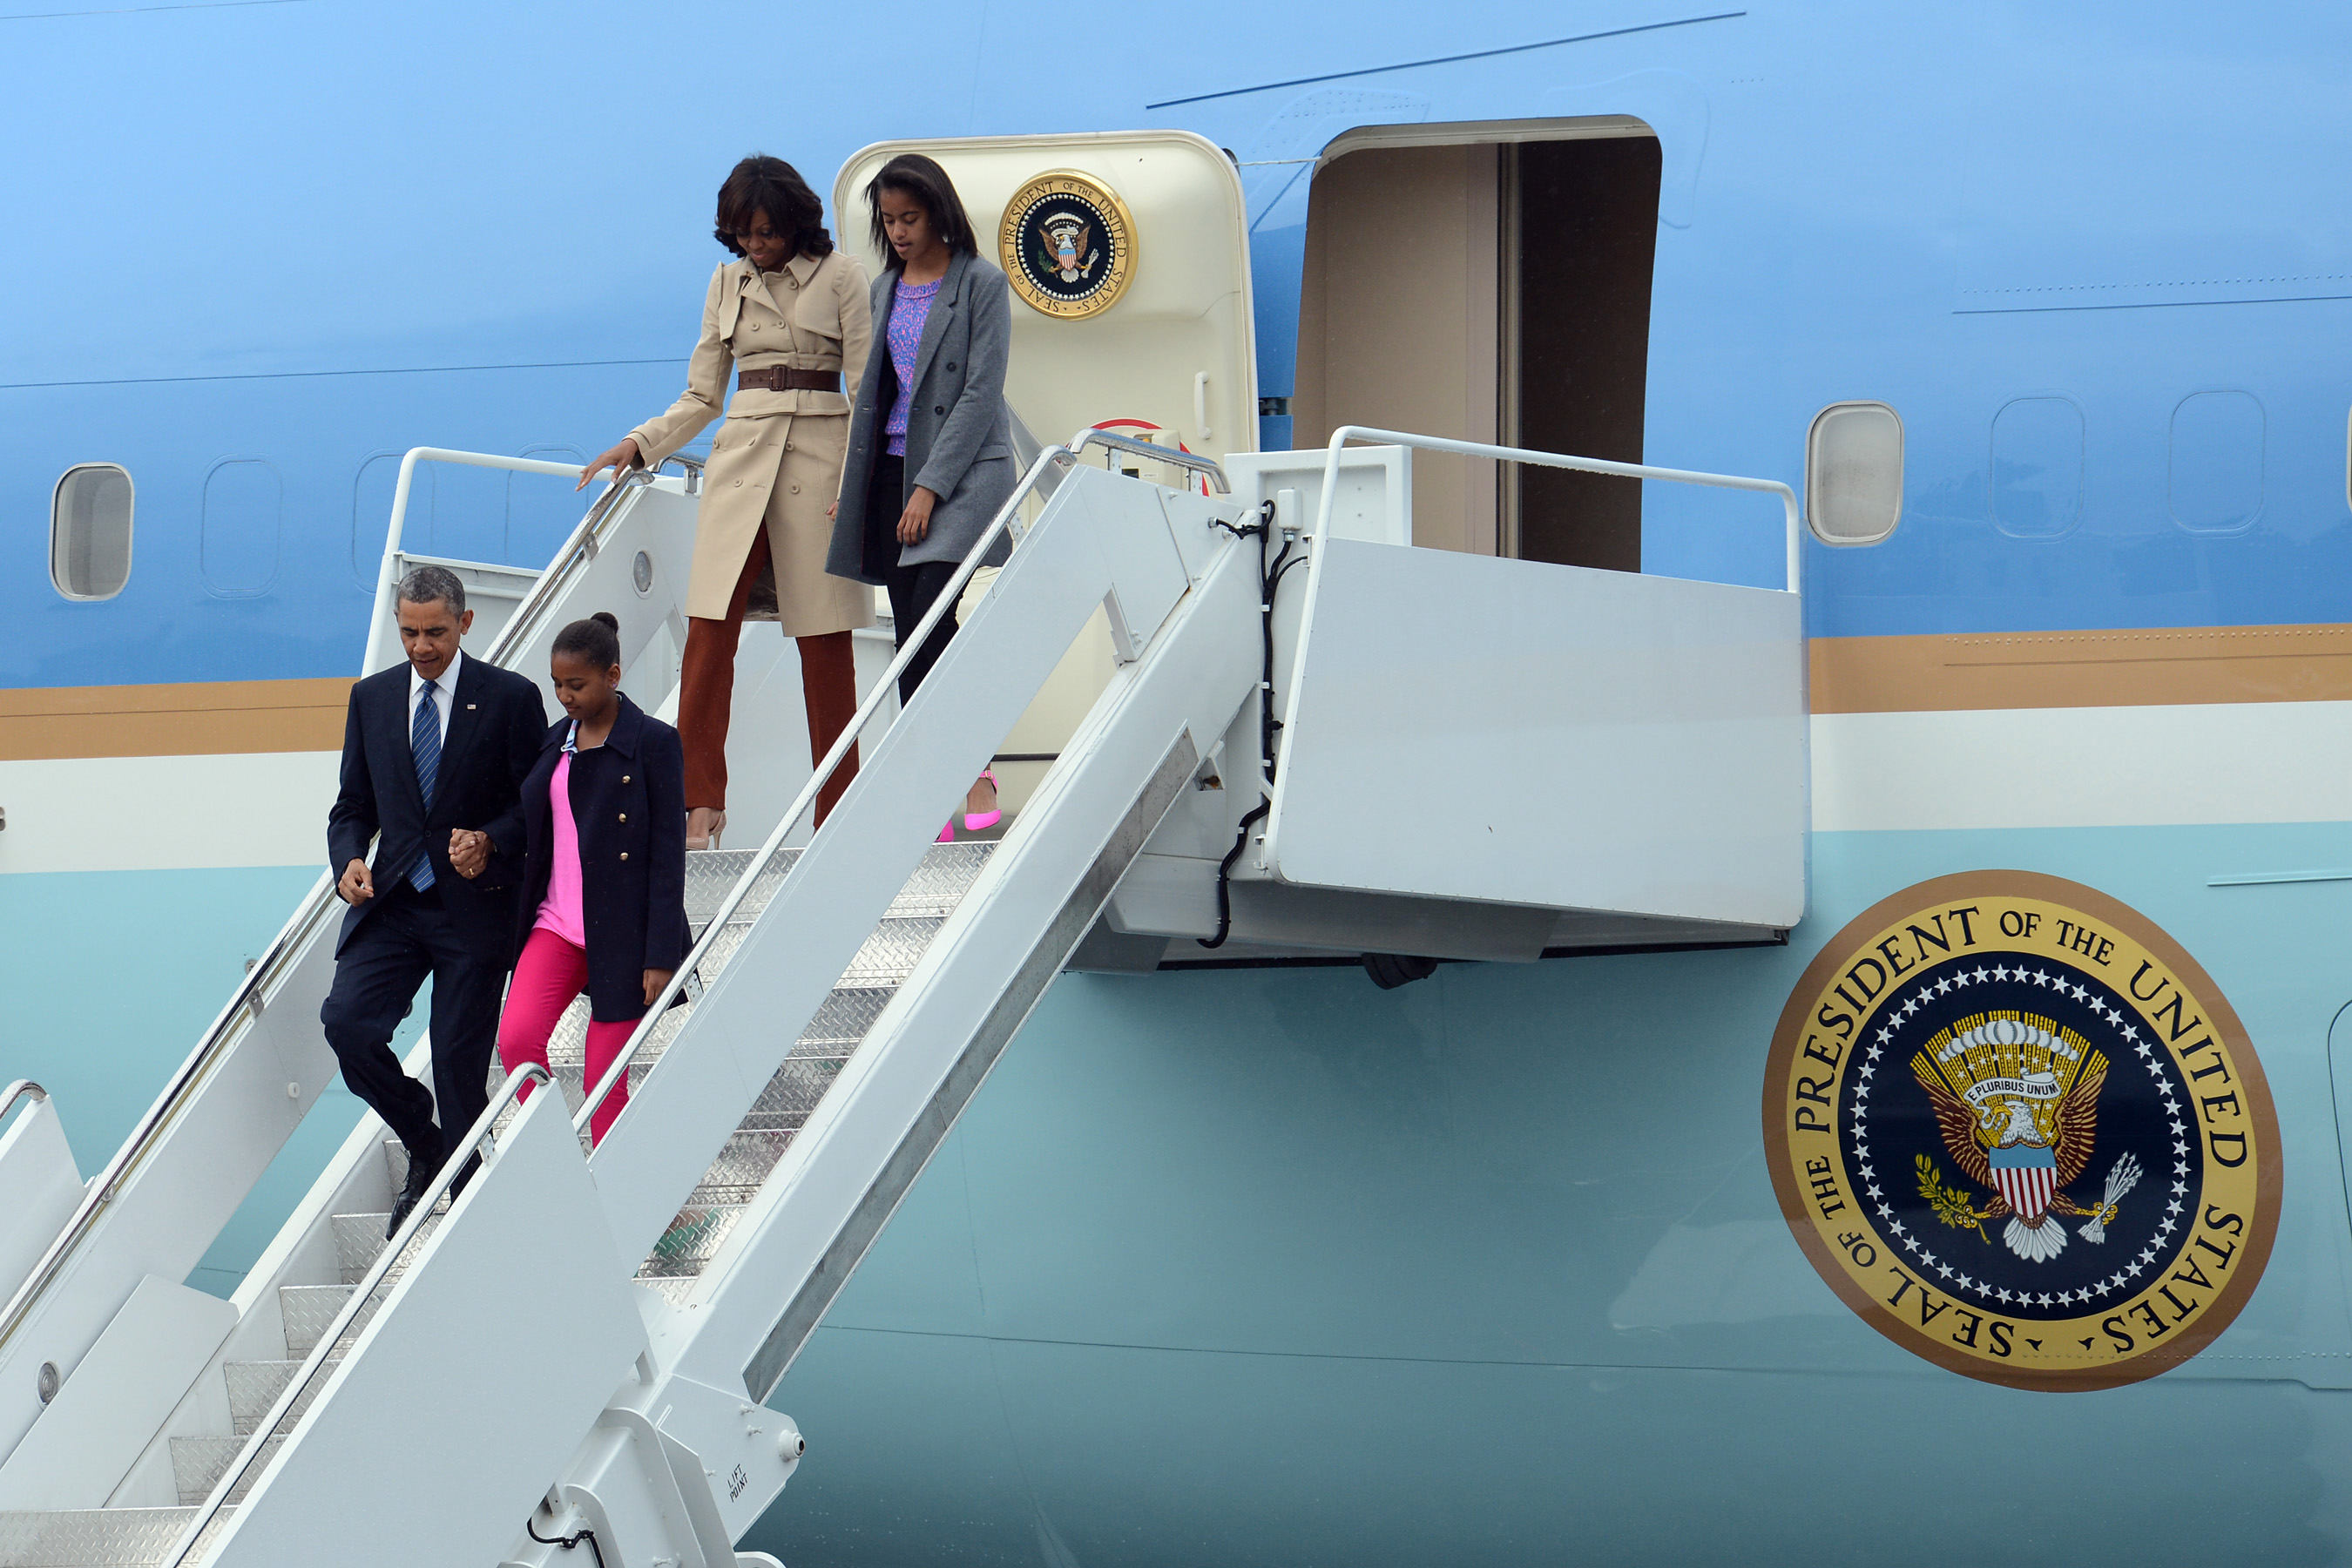 Obama family arrives in Northern Ireland